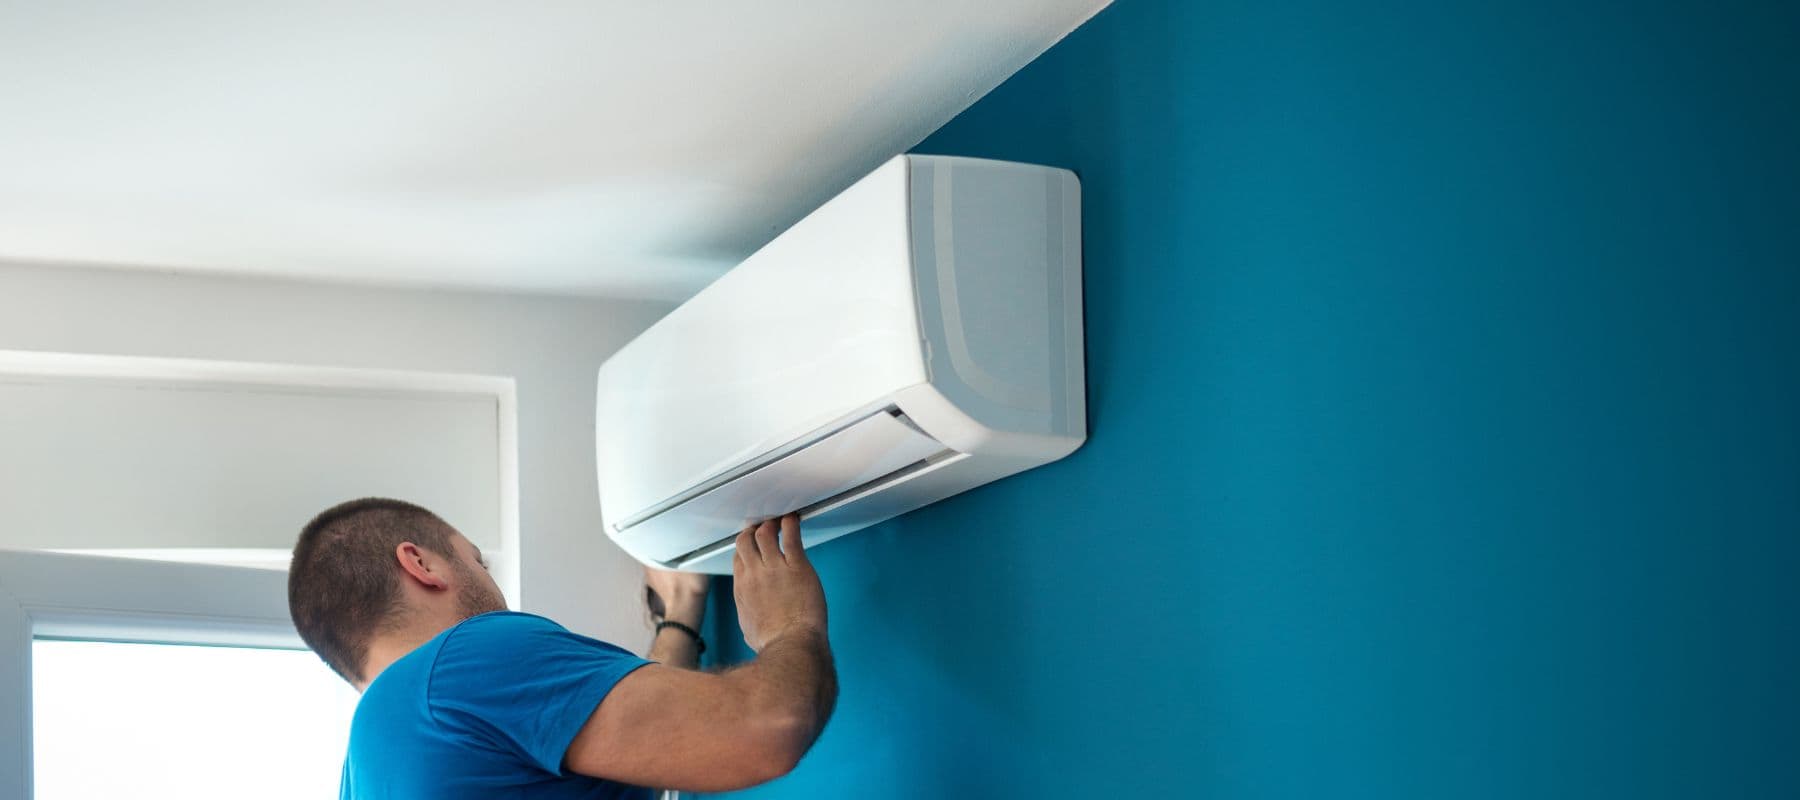 hvac technician looking thoroughly at a newly installed ductless ac unit that was installed on a blue wall